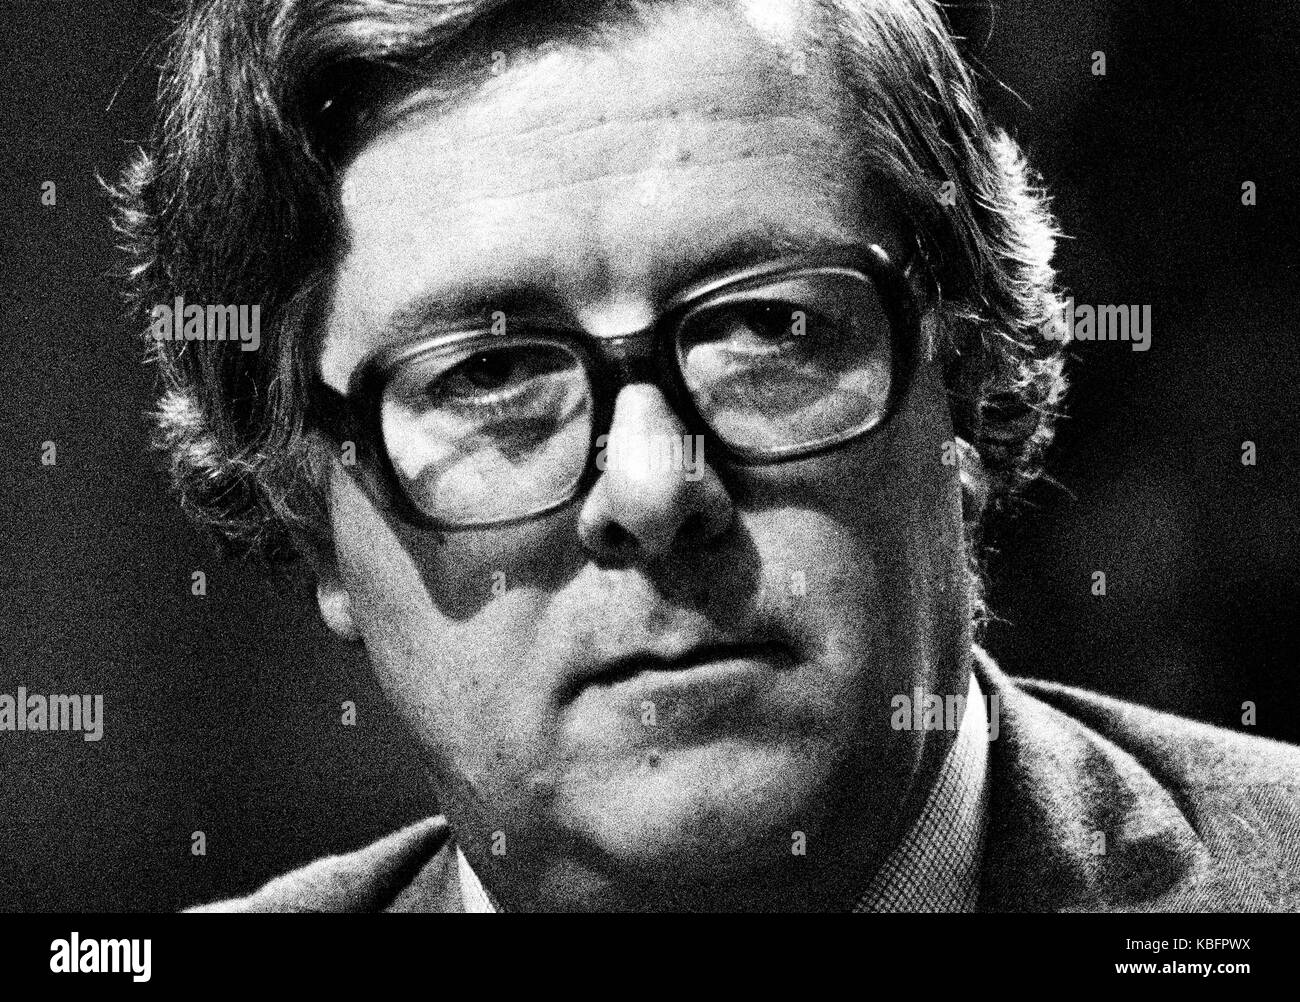 Richard Edward Geoffrey Howe, Baron Howe of Aberavon, CH, PC, QC, known from 1970 to 1992 as Sir Geoffrey Howe, was a British Conservative politician. Exclusive image 1990 David Cole - Press Portrait Service archives Stock Photo